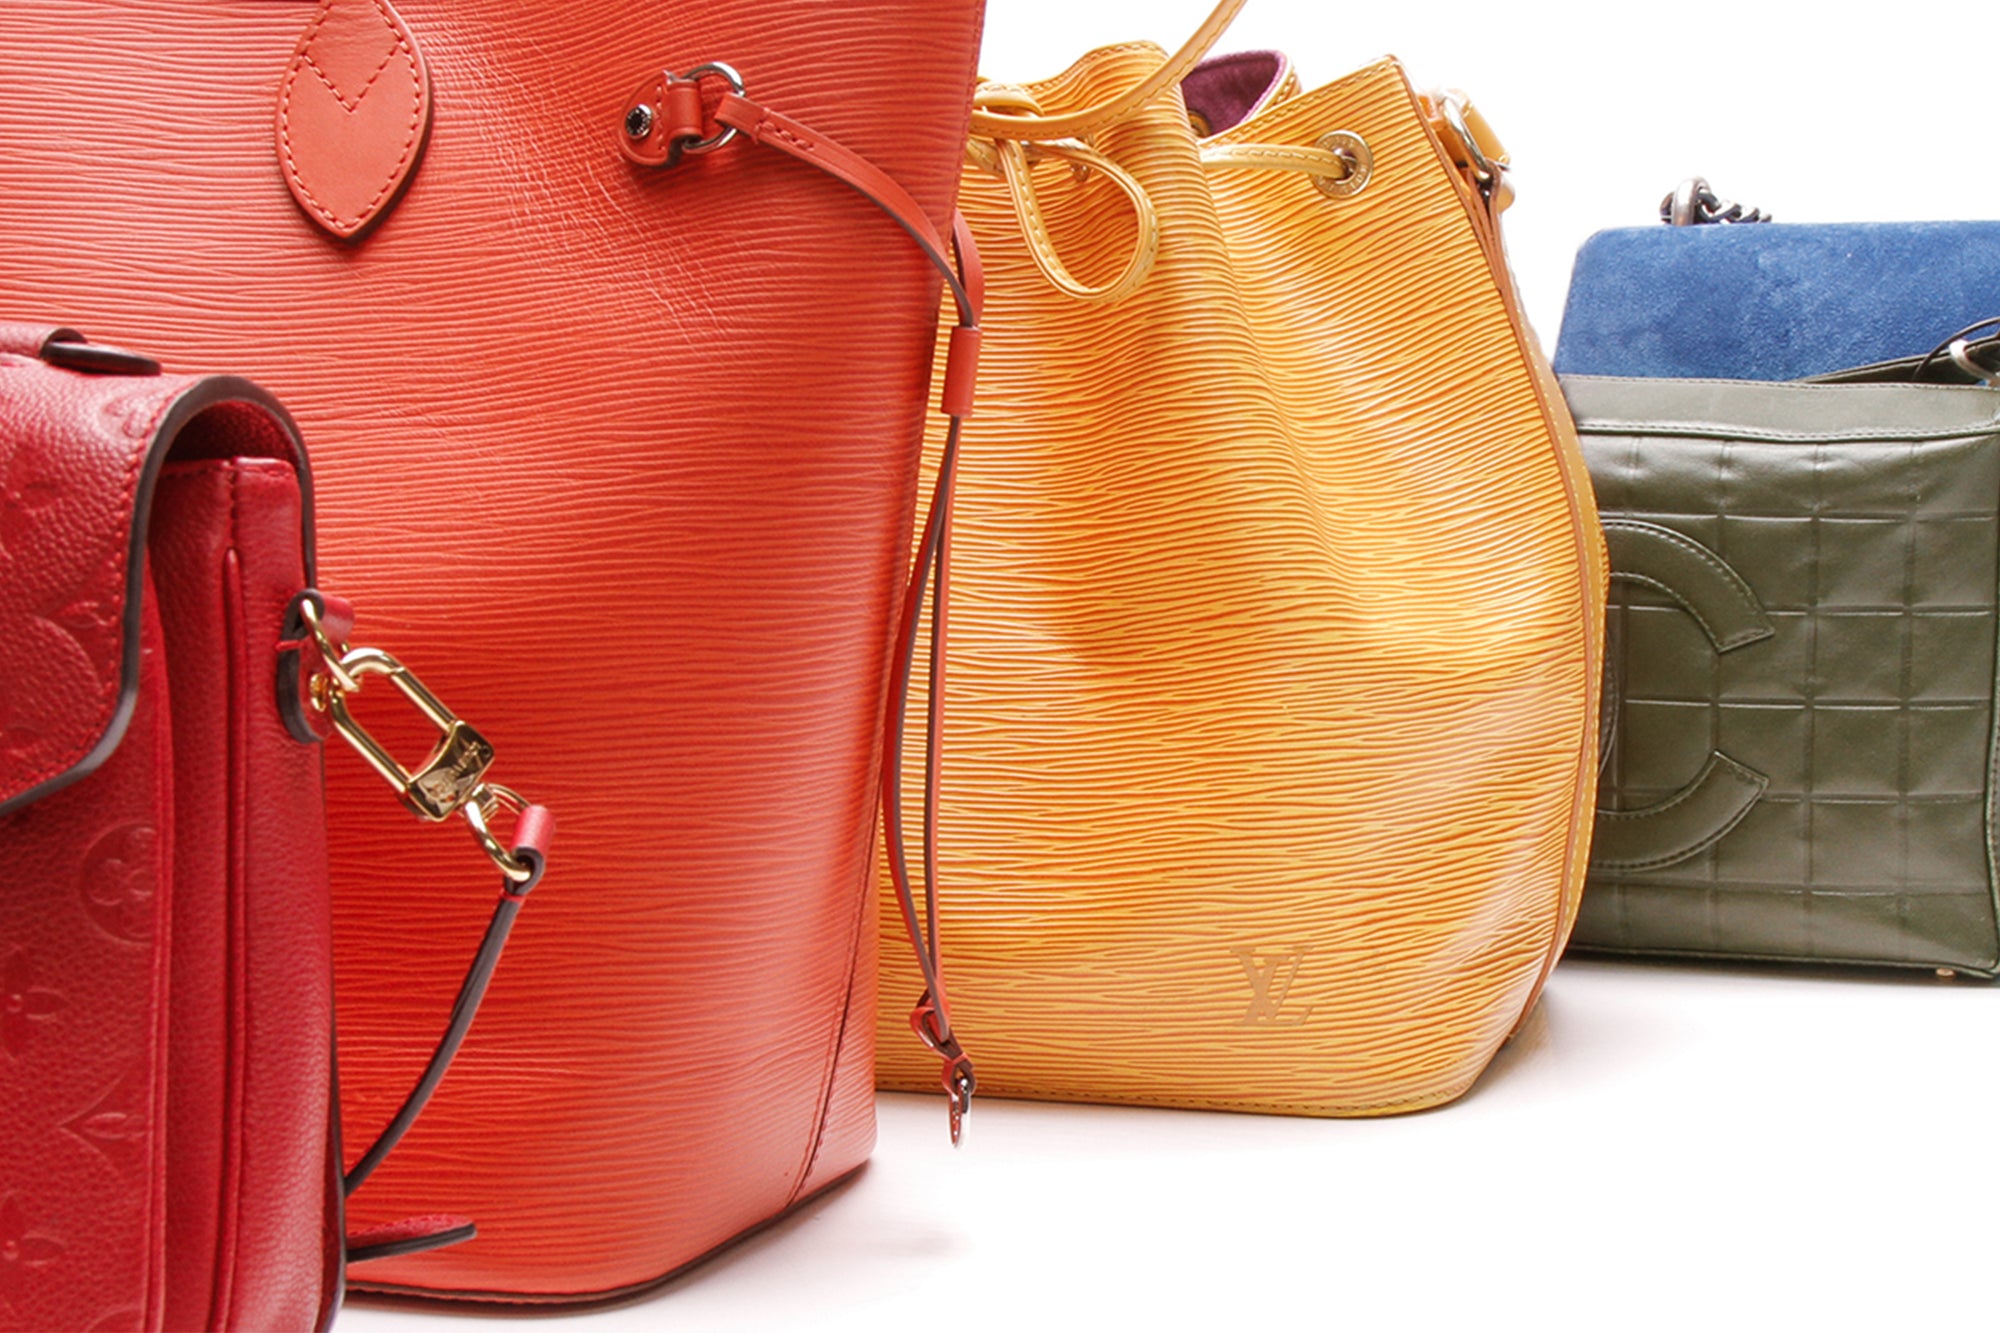 What Color Purse is the Most Versatile?